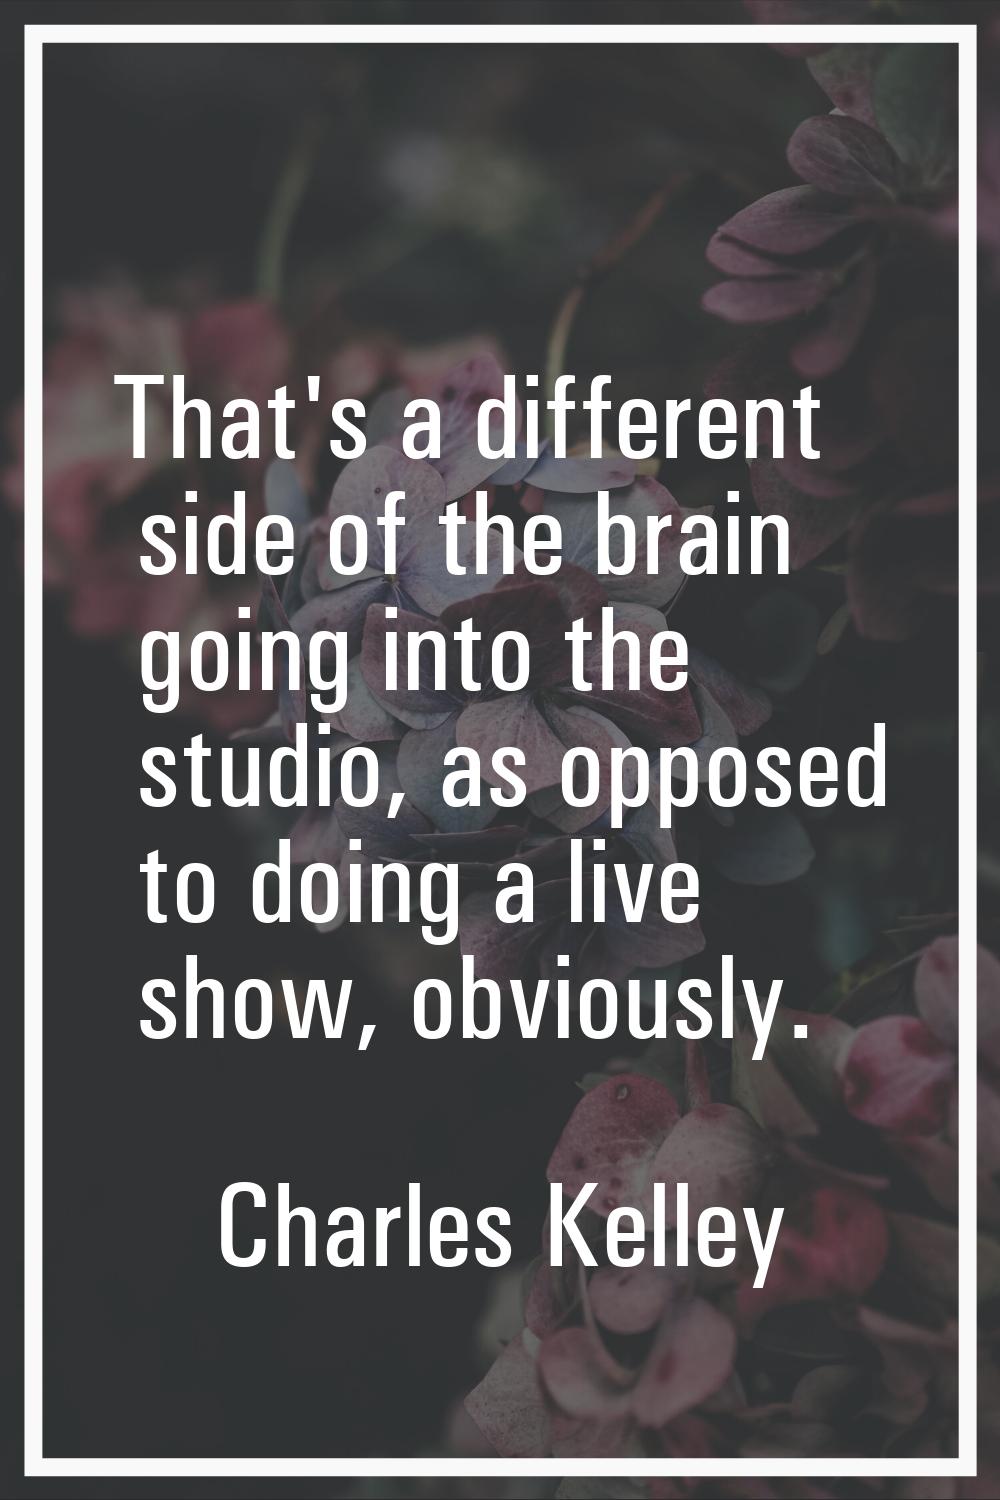 That's a different side of the brain going into the studio, as opposed to doing a live show, obviou